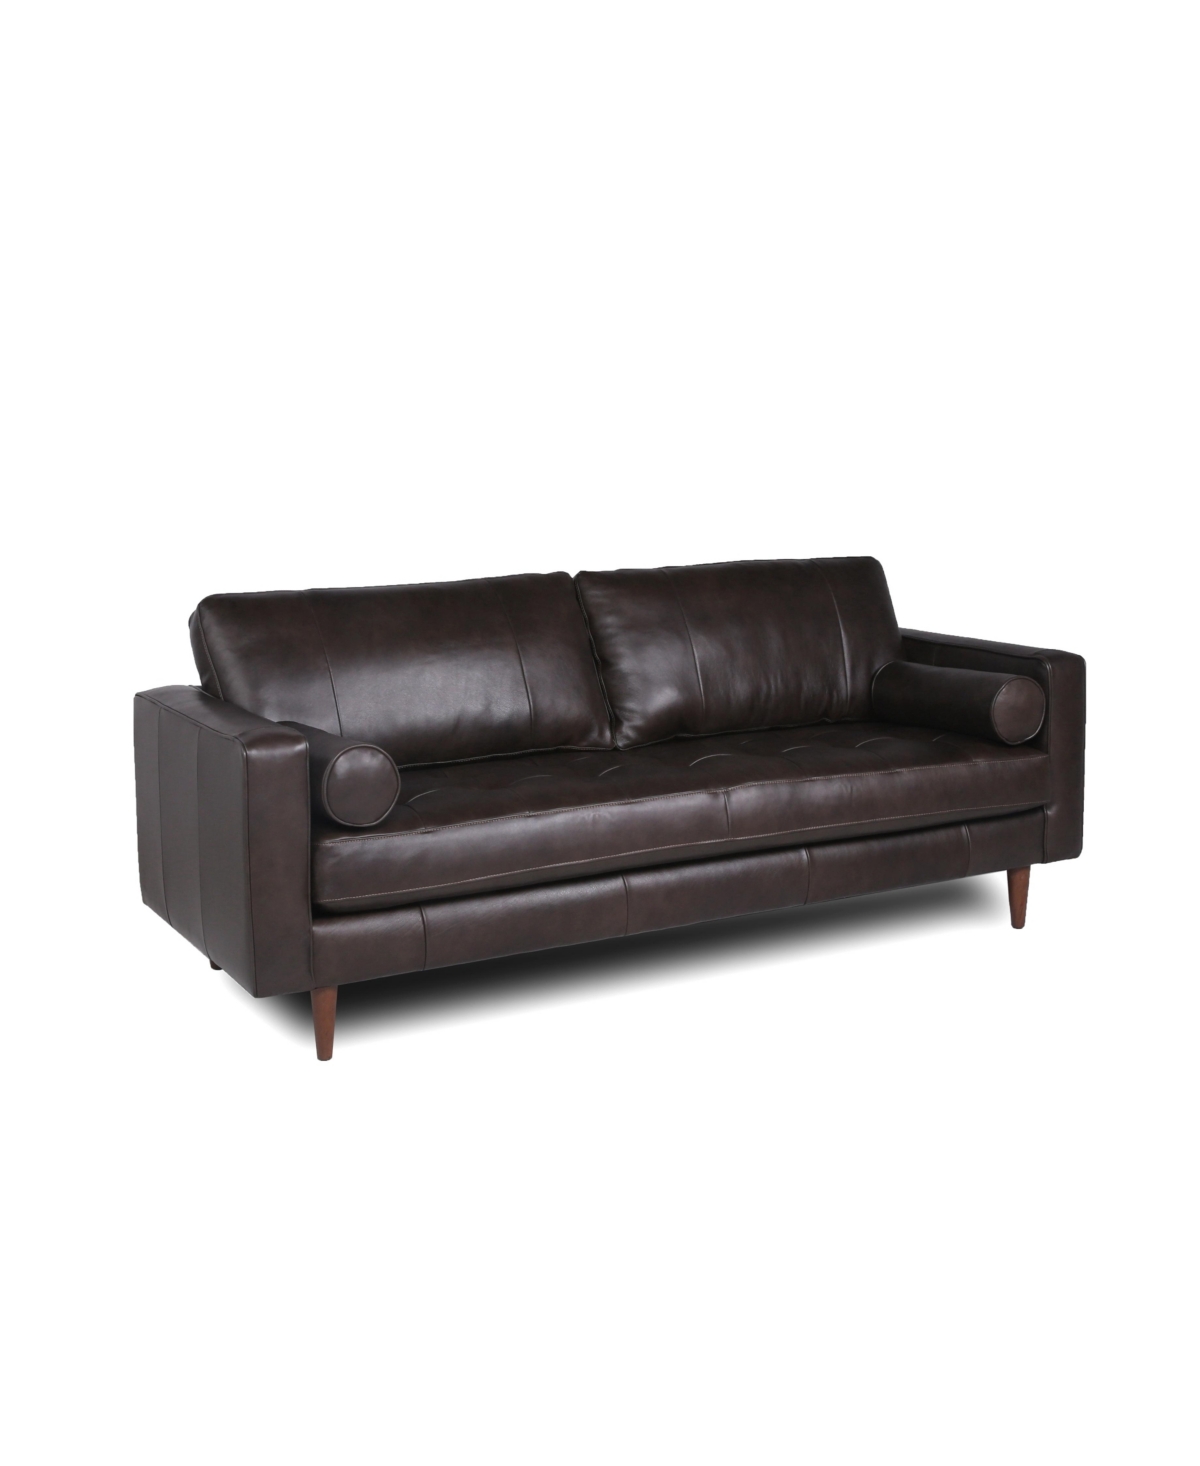 Nice Link Maebelle Leather Sofa With Tufted Seat And Back In Brown